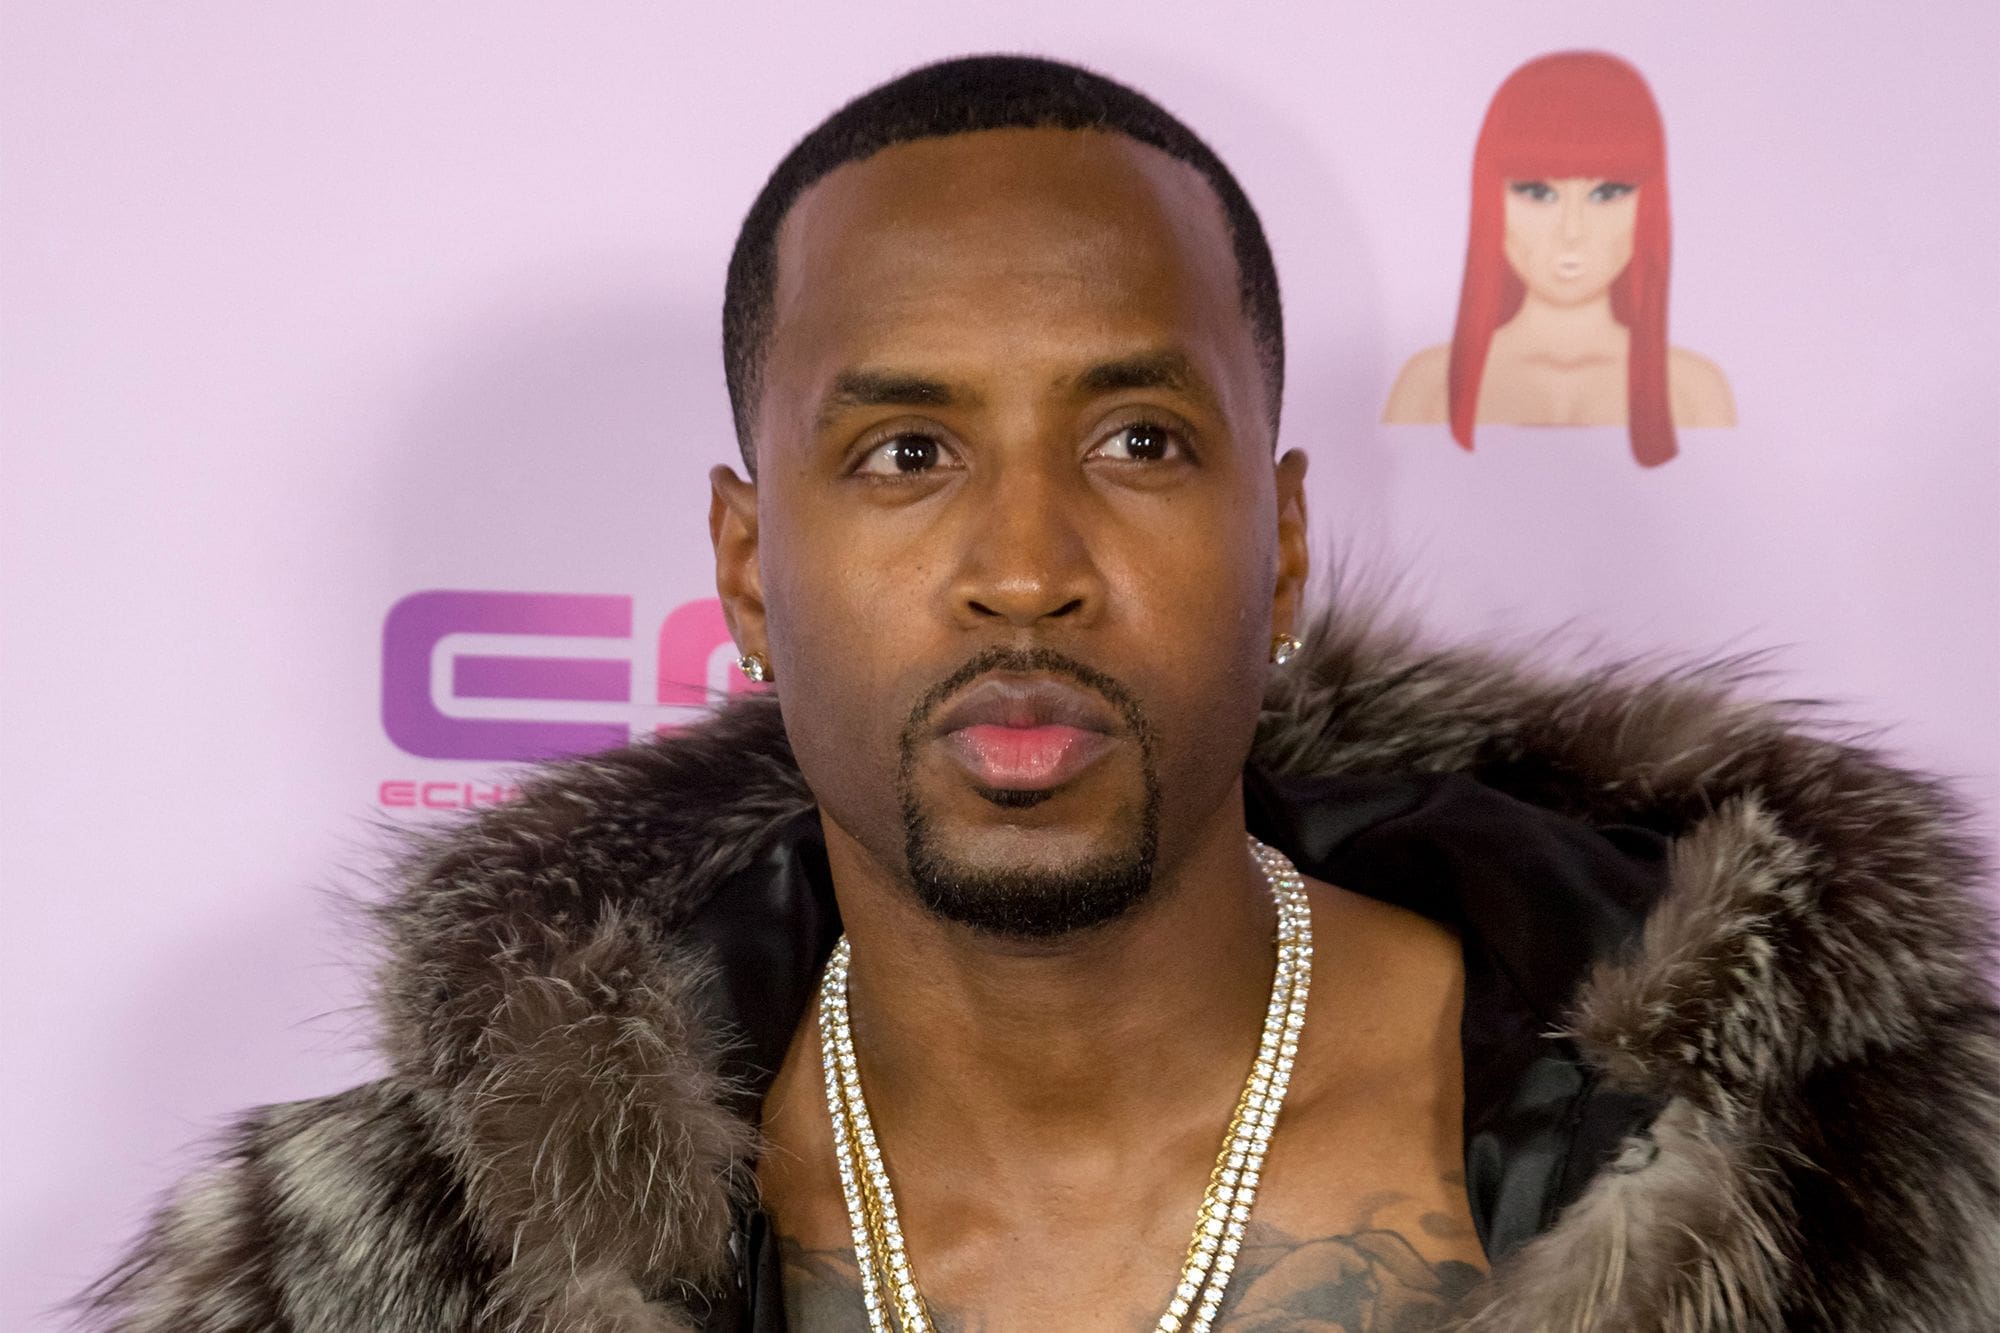 Safaree Poses With His Baby Girl, Safire Majesty - See Their Cute Photo Here